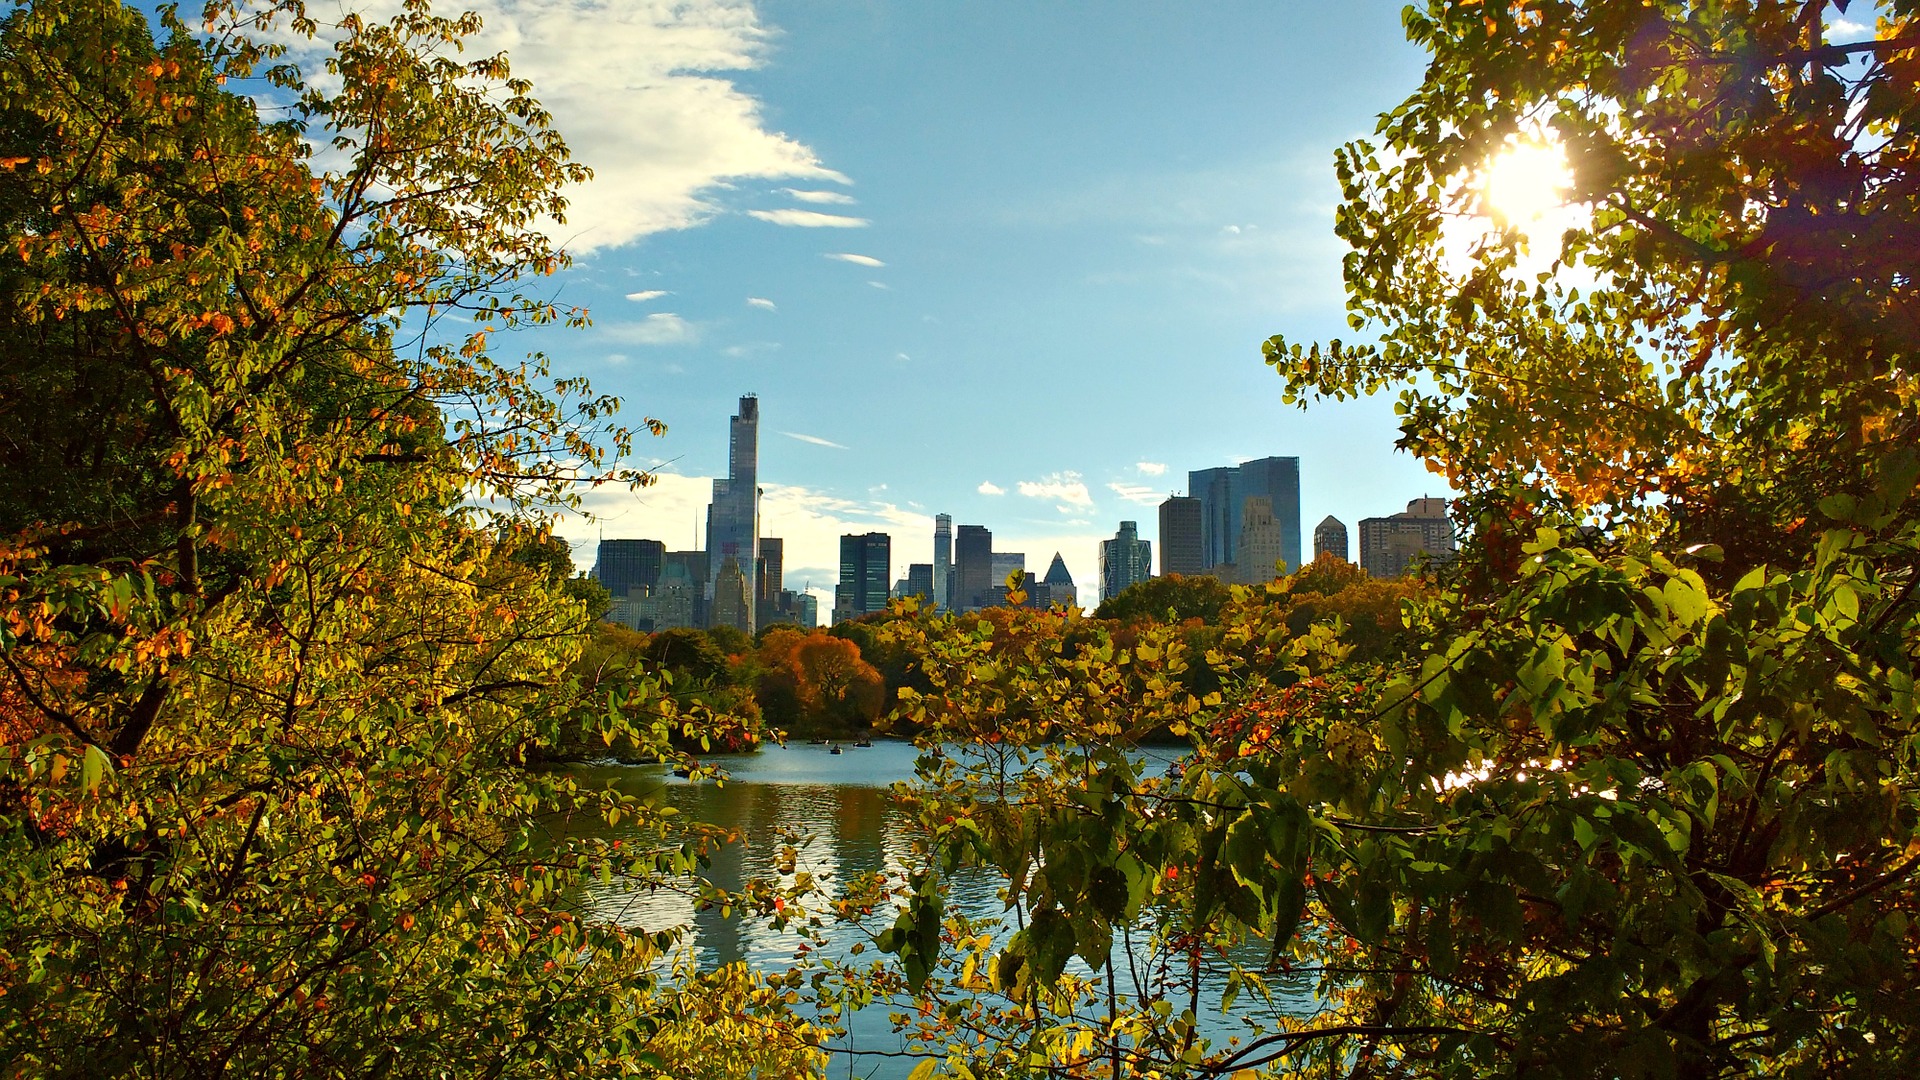 A blissful autumn day, will fall foliage in Central Park framing the skyline.